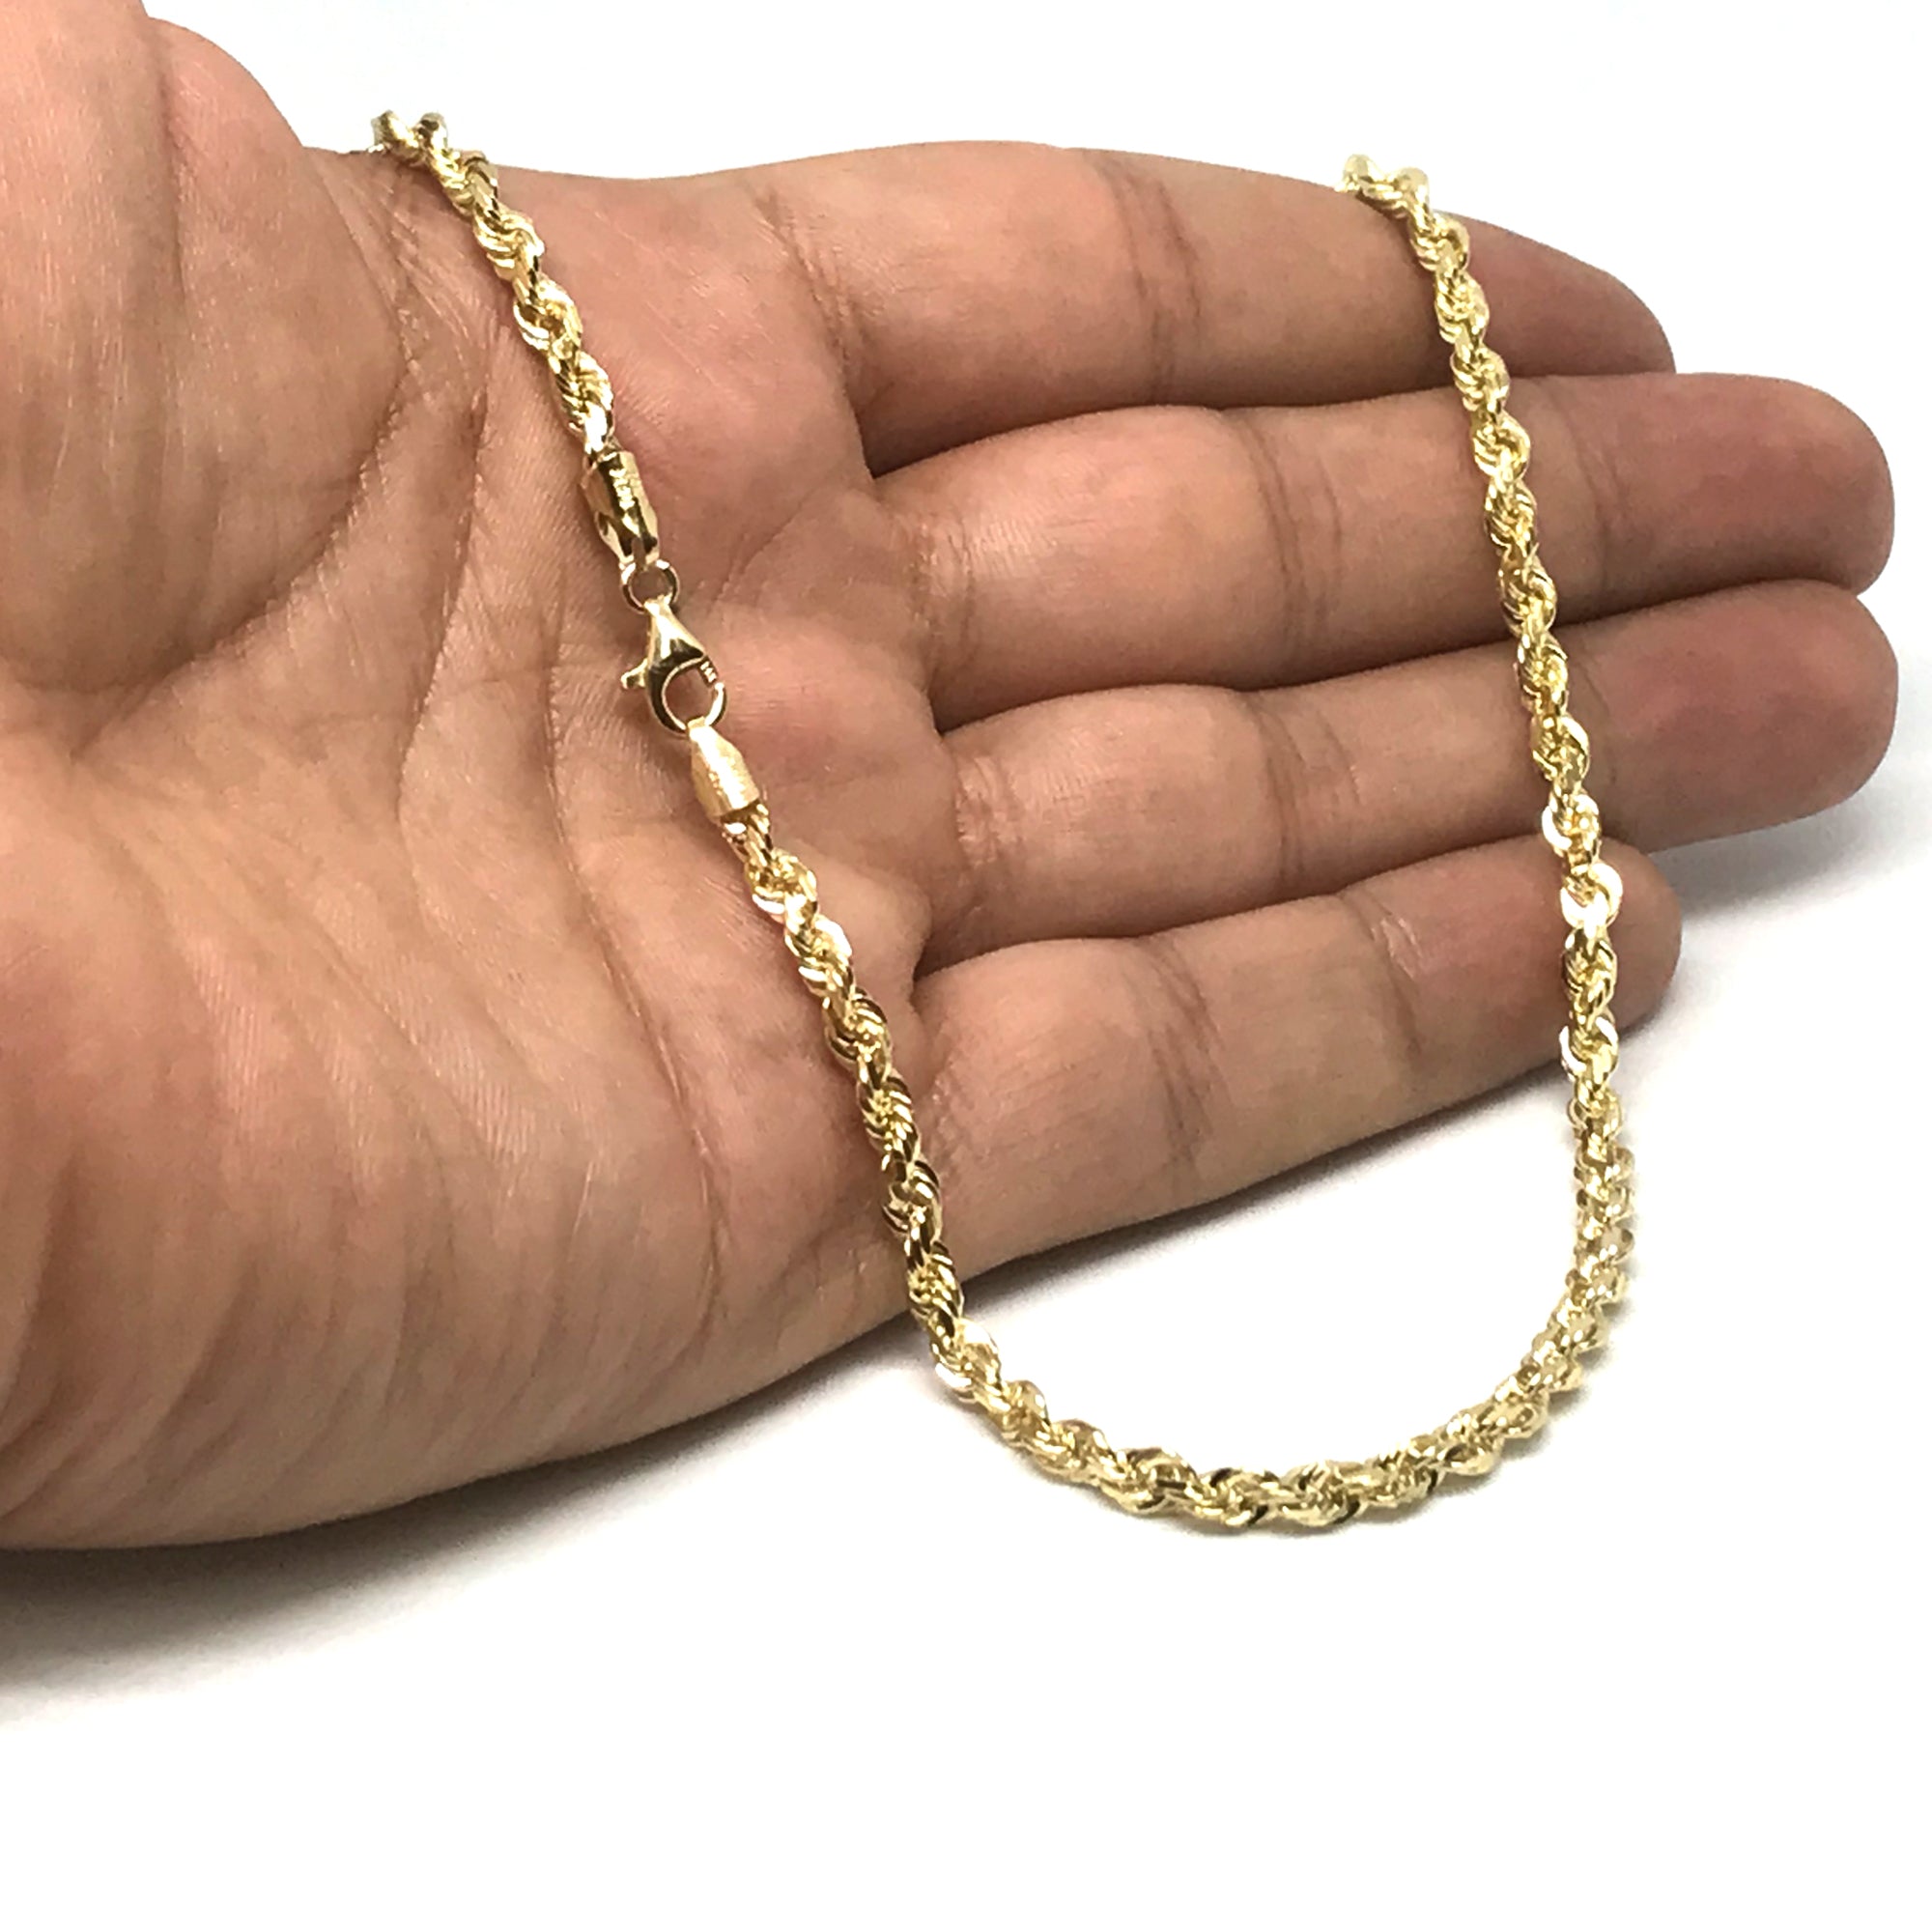 10k Yellow Solid Gold Diamond Cut Rope Chain Necklace, 4.0mm fine designer jewelry for men and women